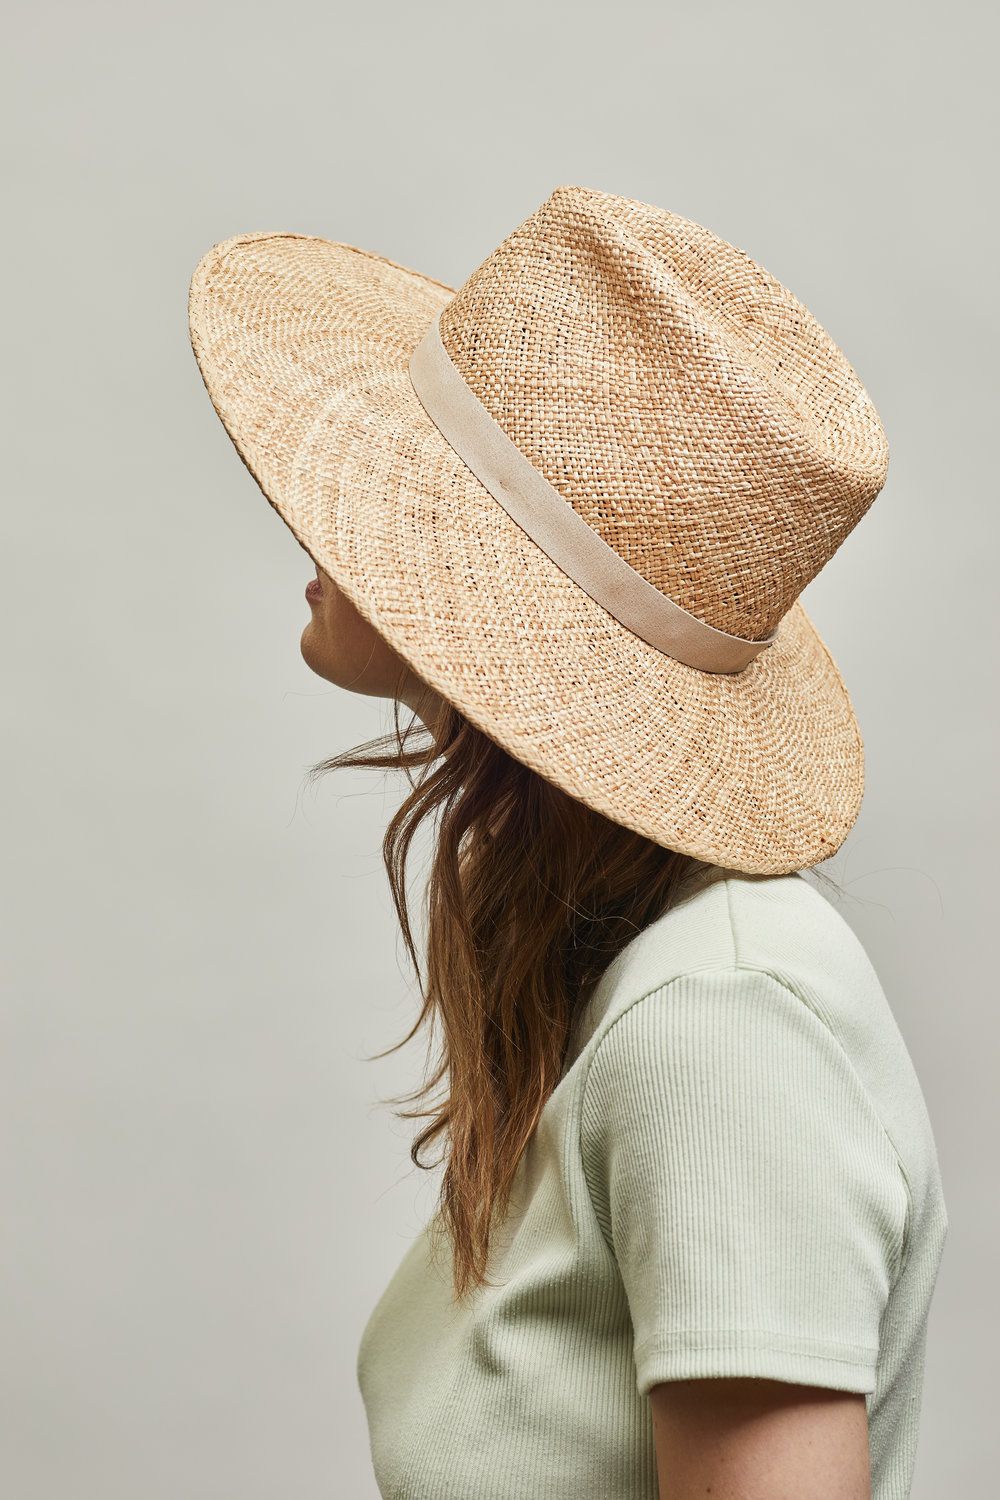 Beach Hats: Stay Stylish and Protected from the Sun with Chic Beach Hats